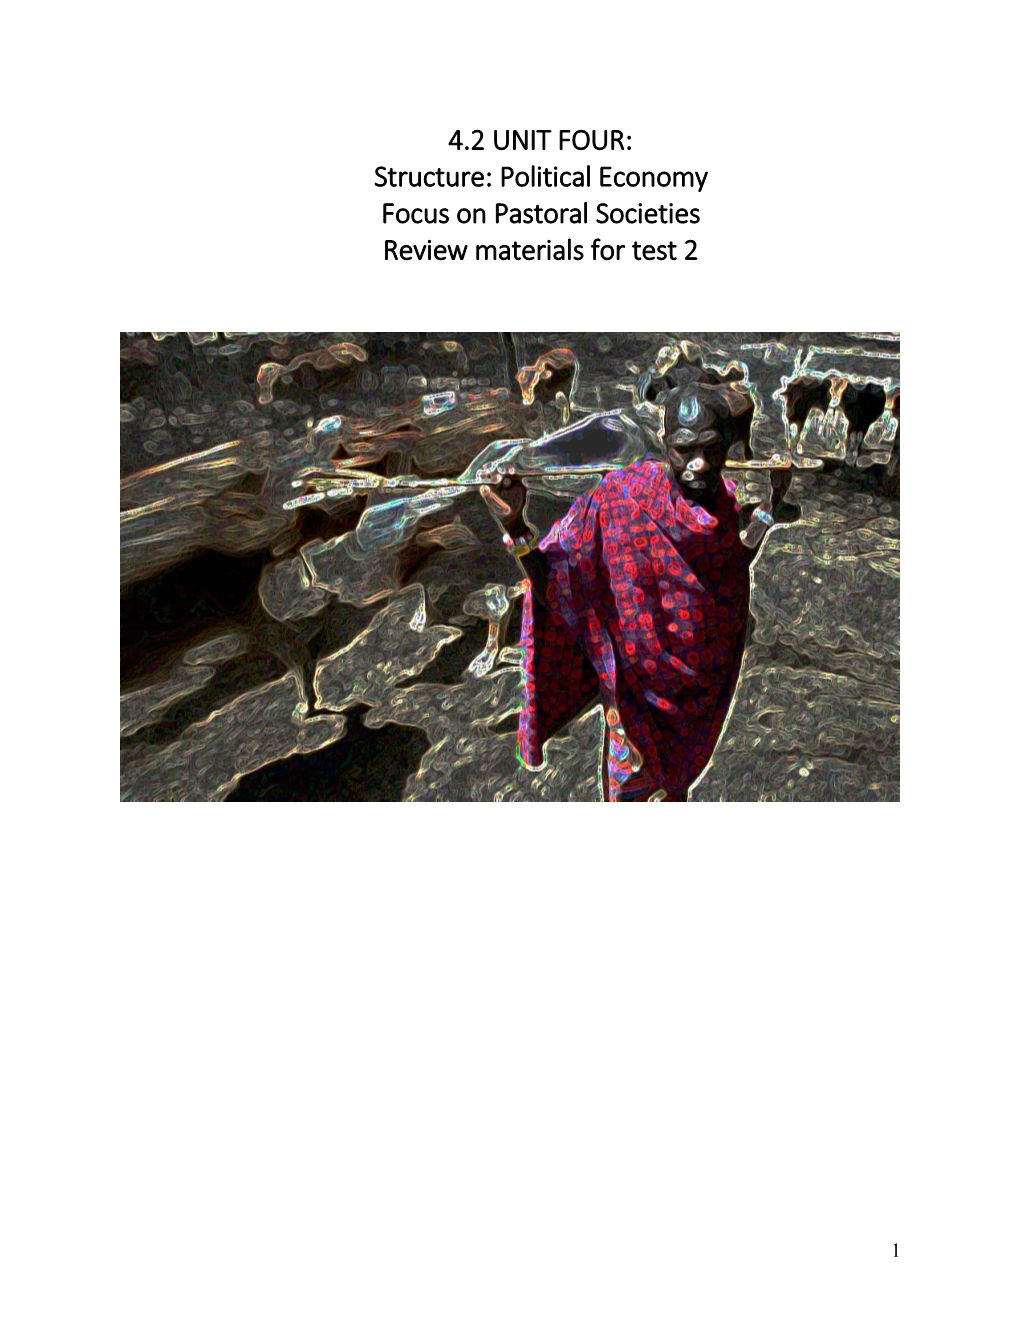 4.2 UNIT FOUR: Structure: Political Economy Focus on Pastoral Societies Review Materials for Test 2